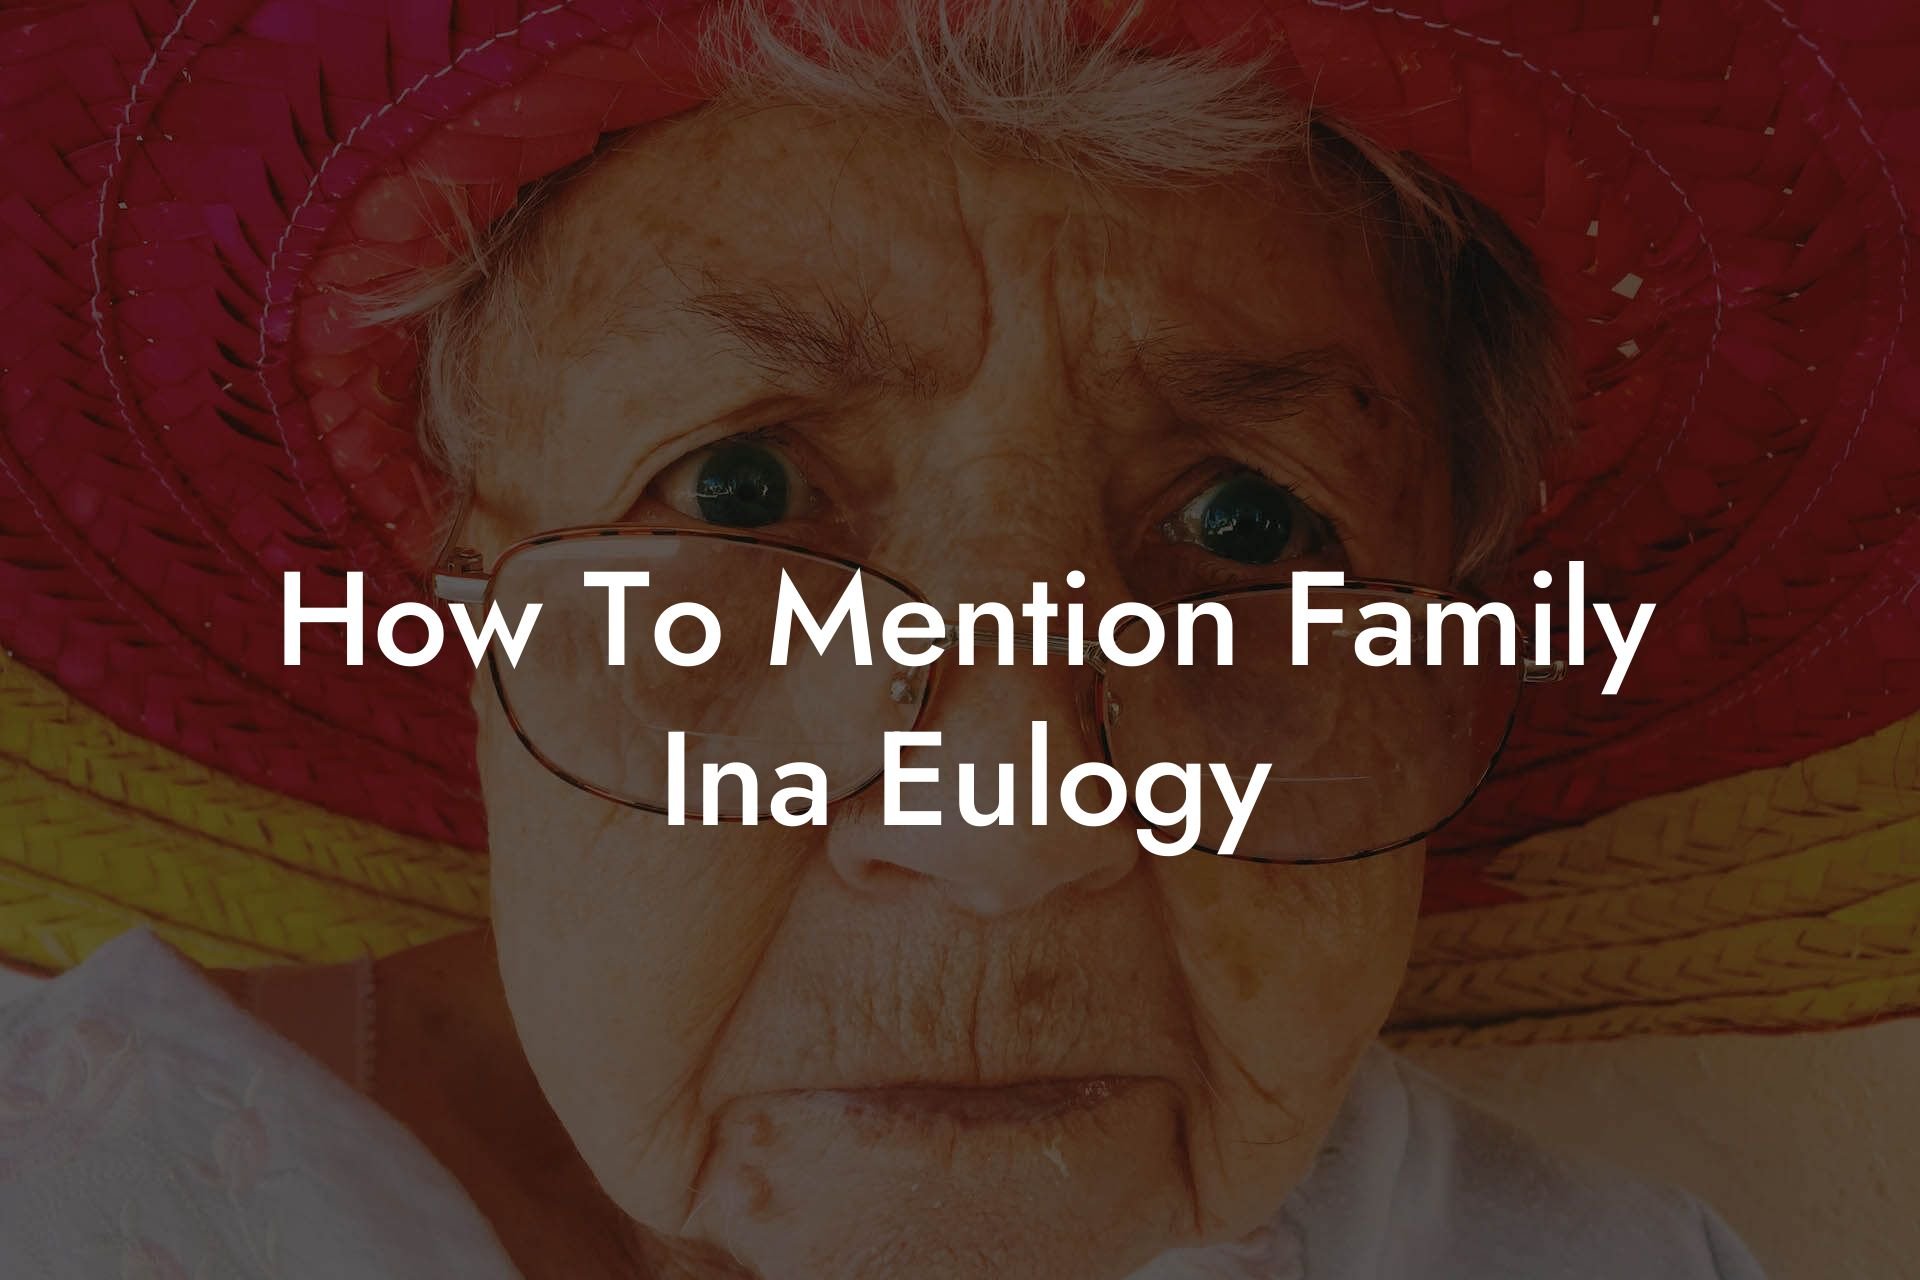 How To Mention Family Ina Eulogy